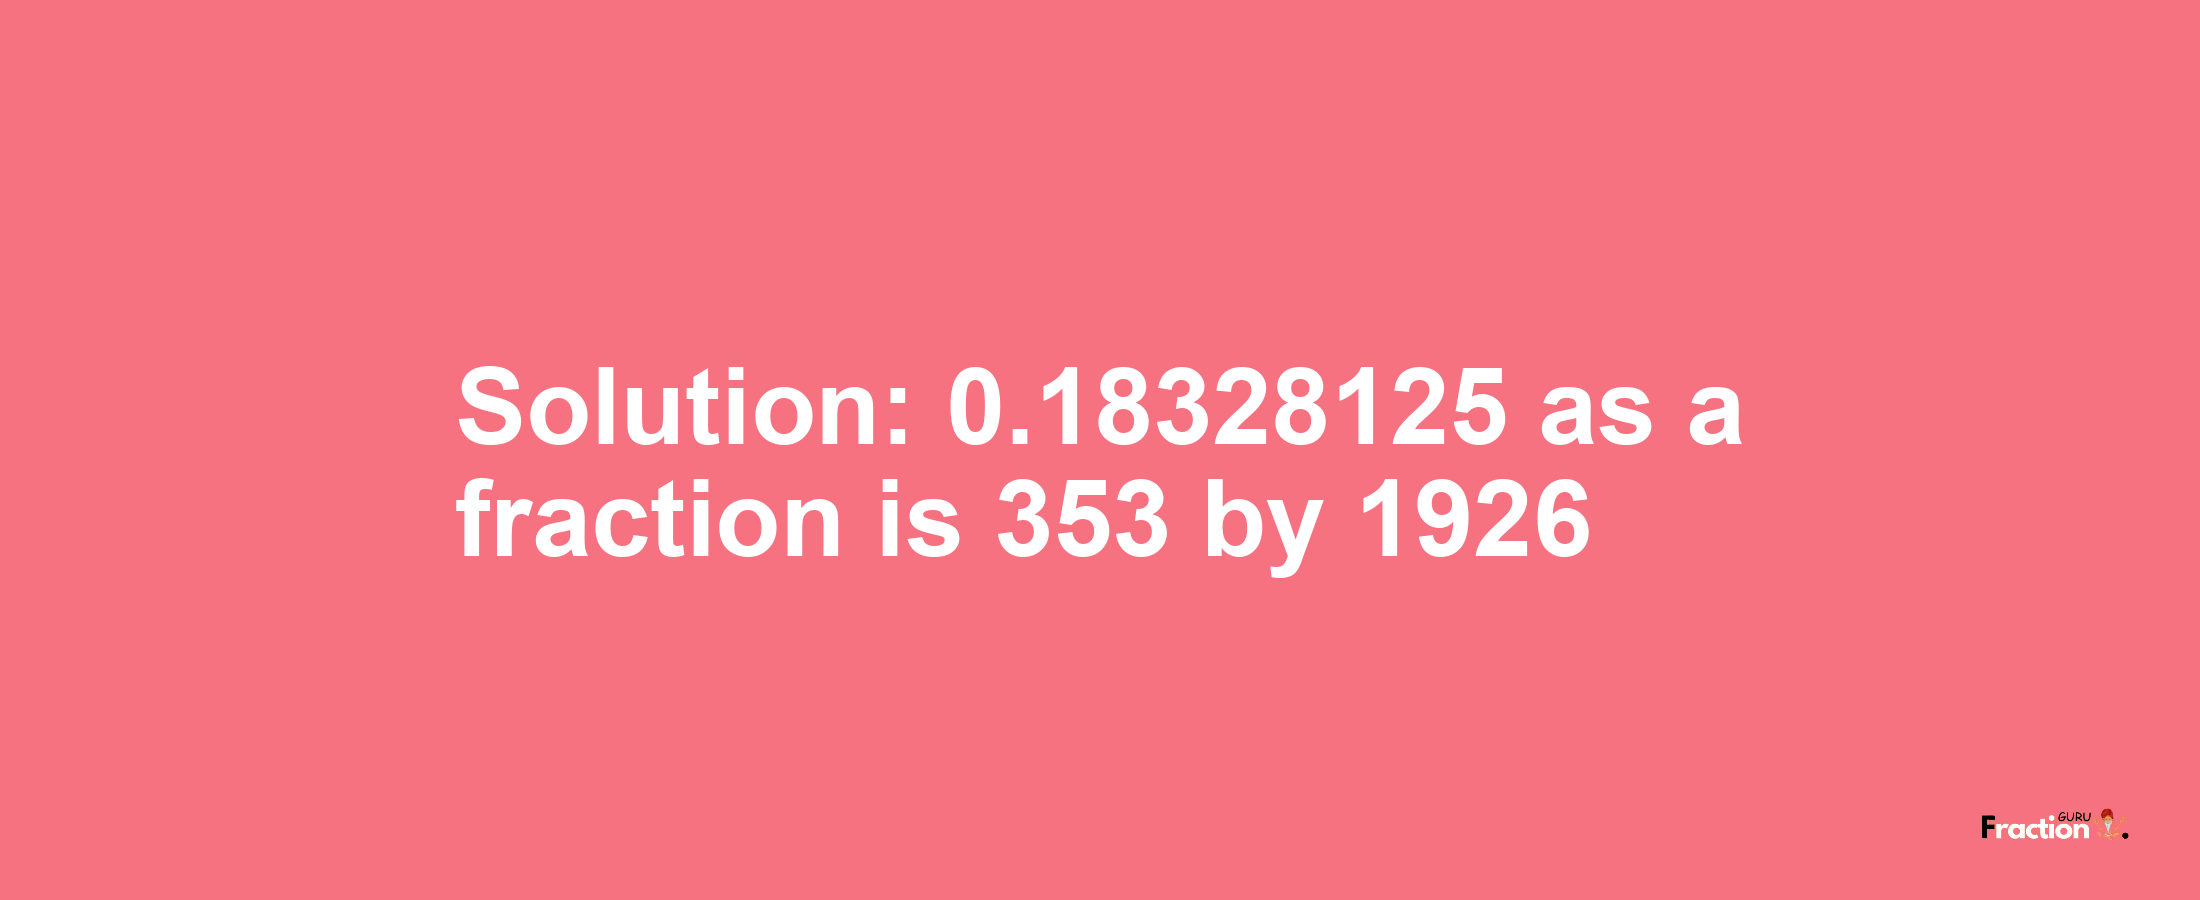 Solution:0.18328125 as a fraction is 353/1926